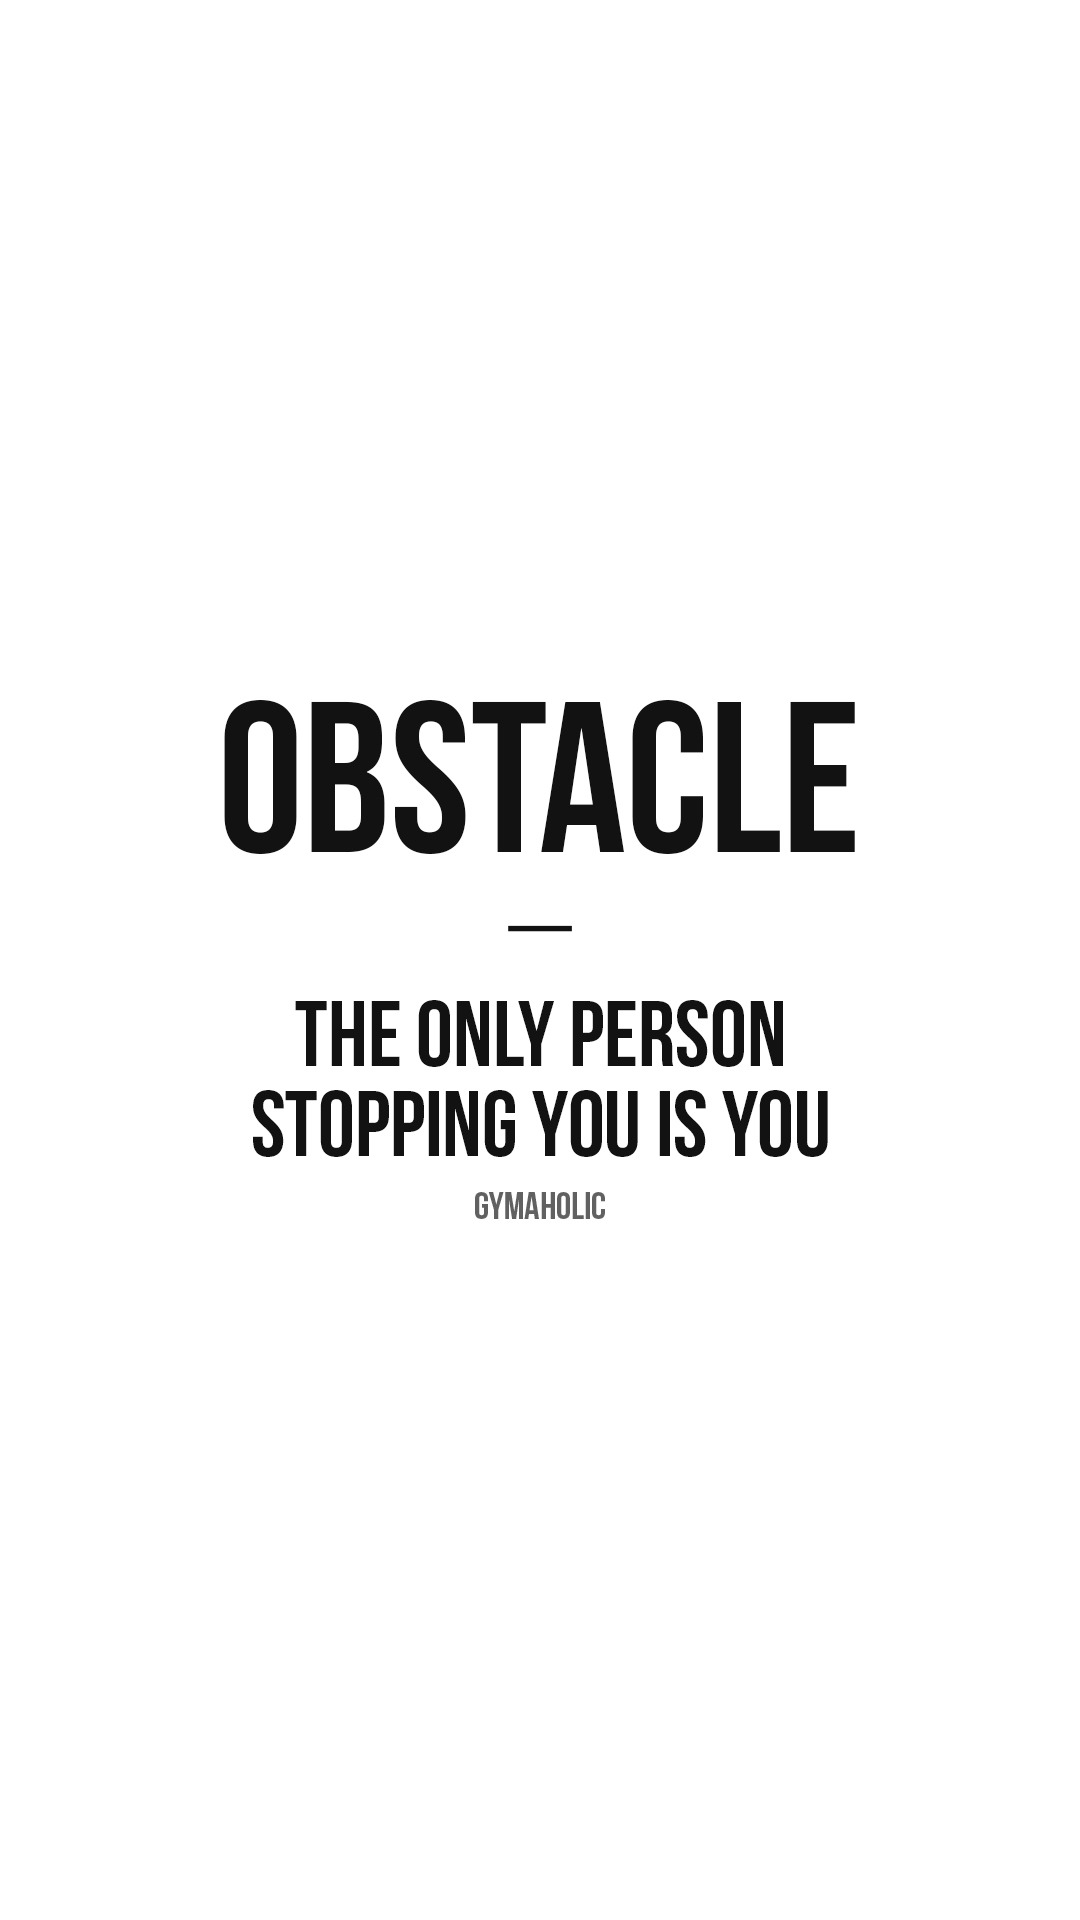 Obstacle: the only person stopping you is you